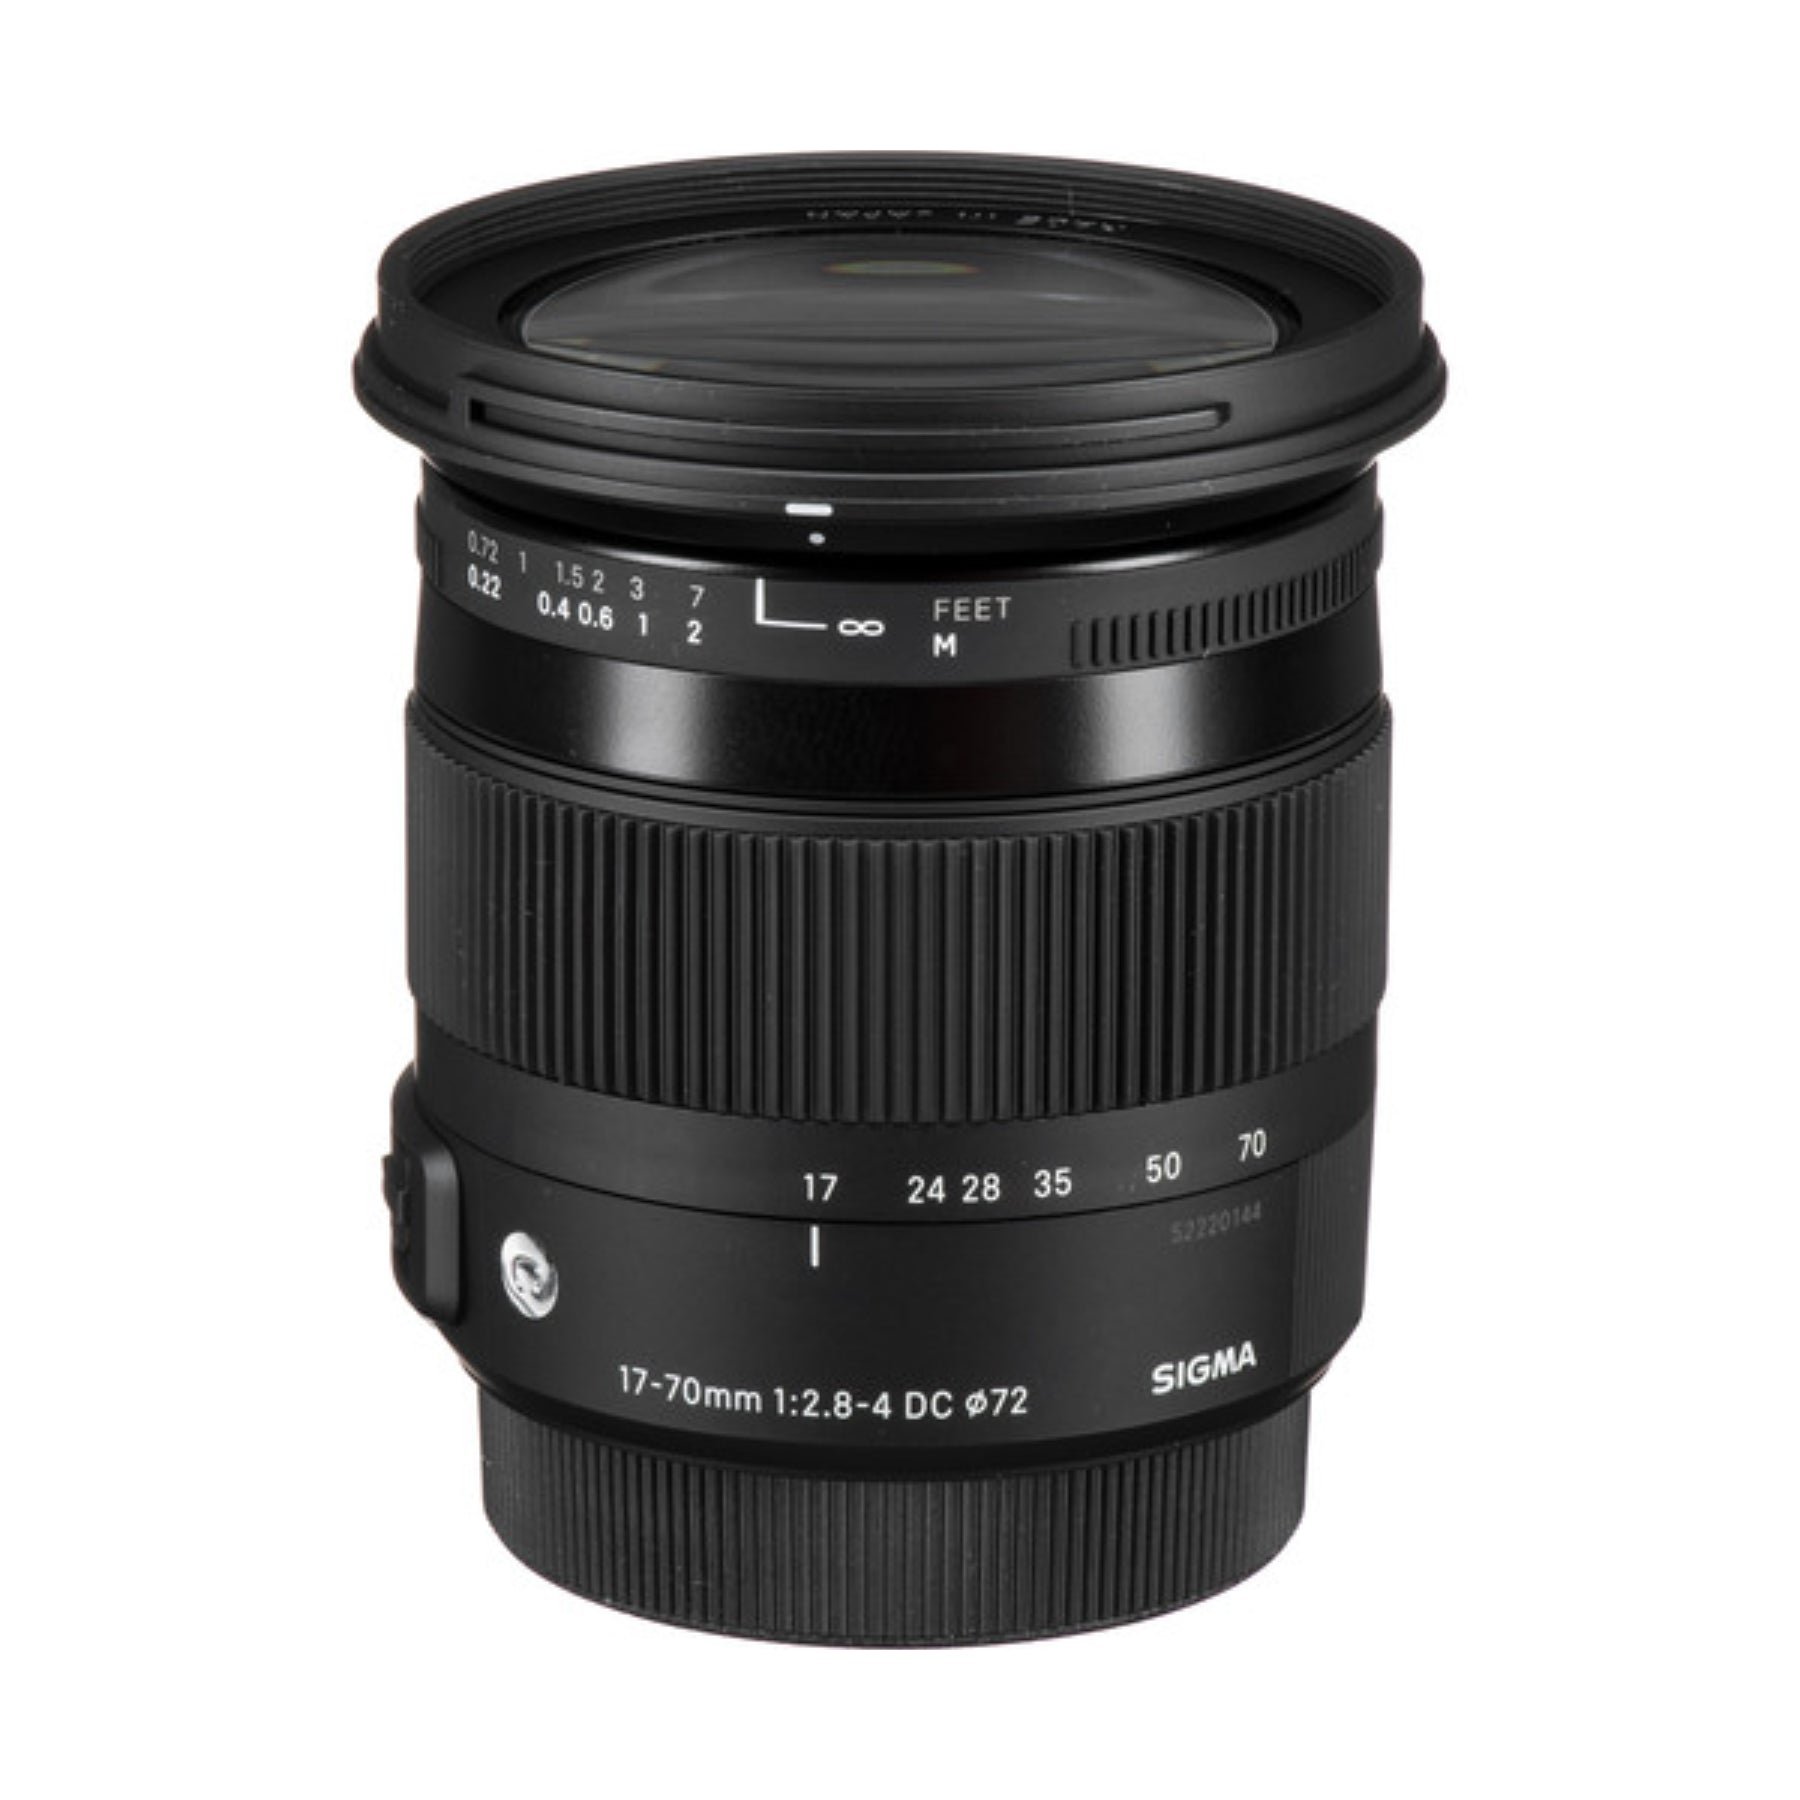 Sigma 17-70mm 2.8-4 canon ef mount lens for hire